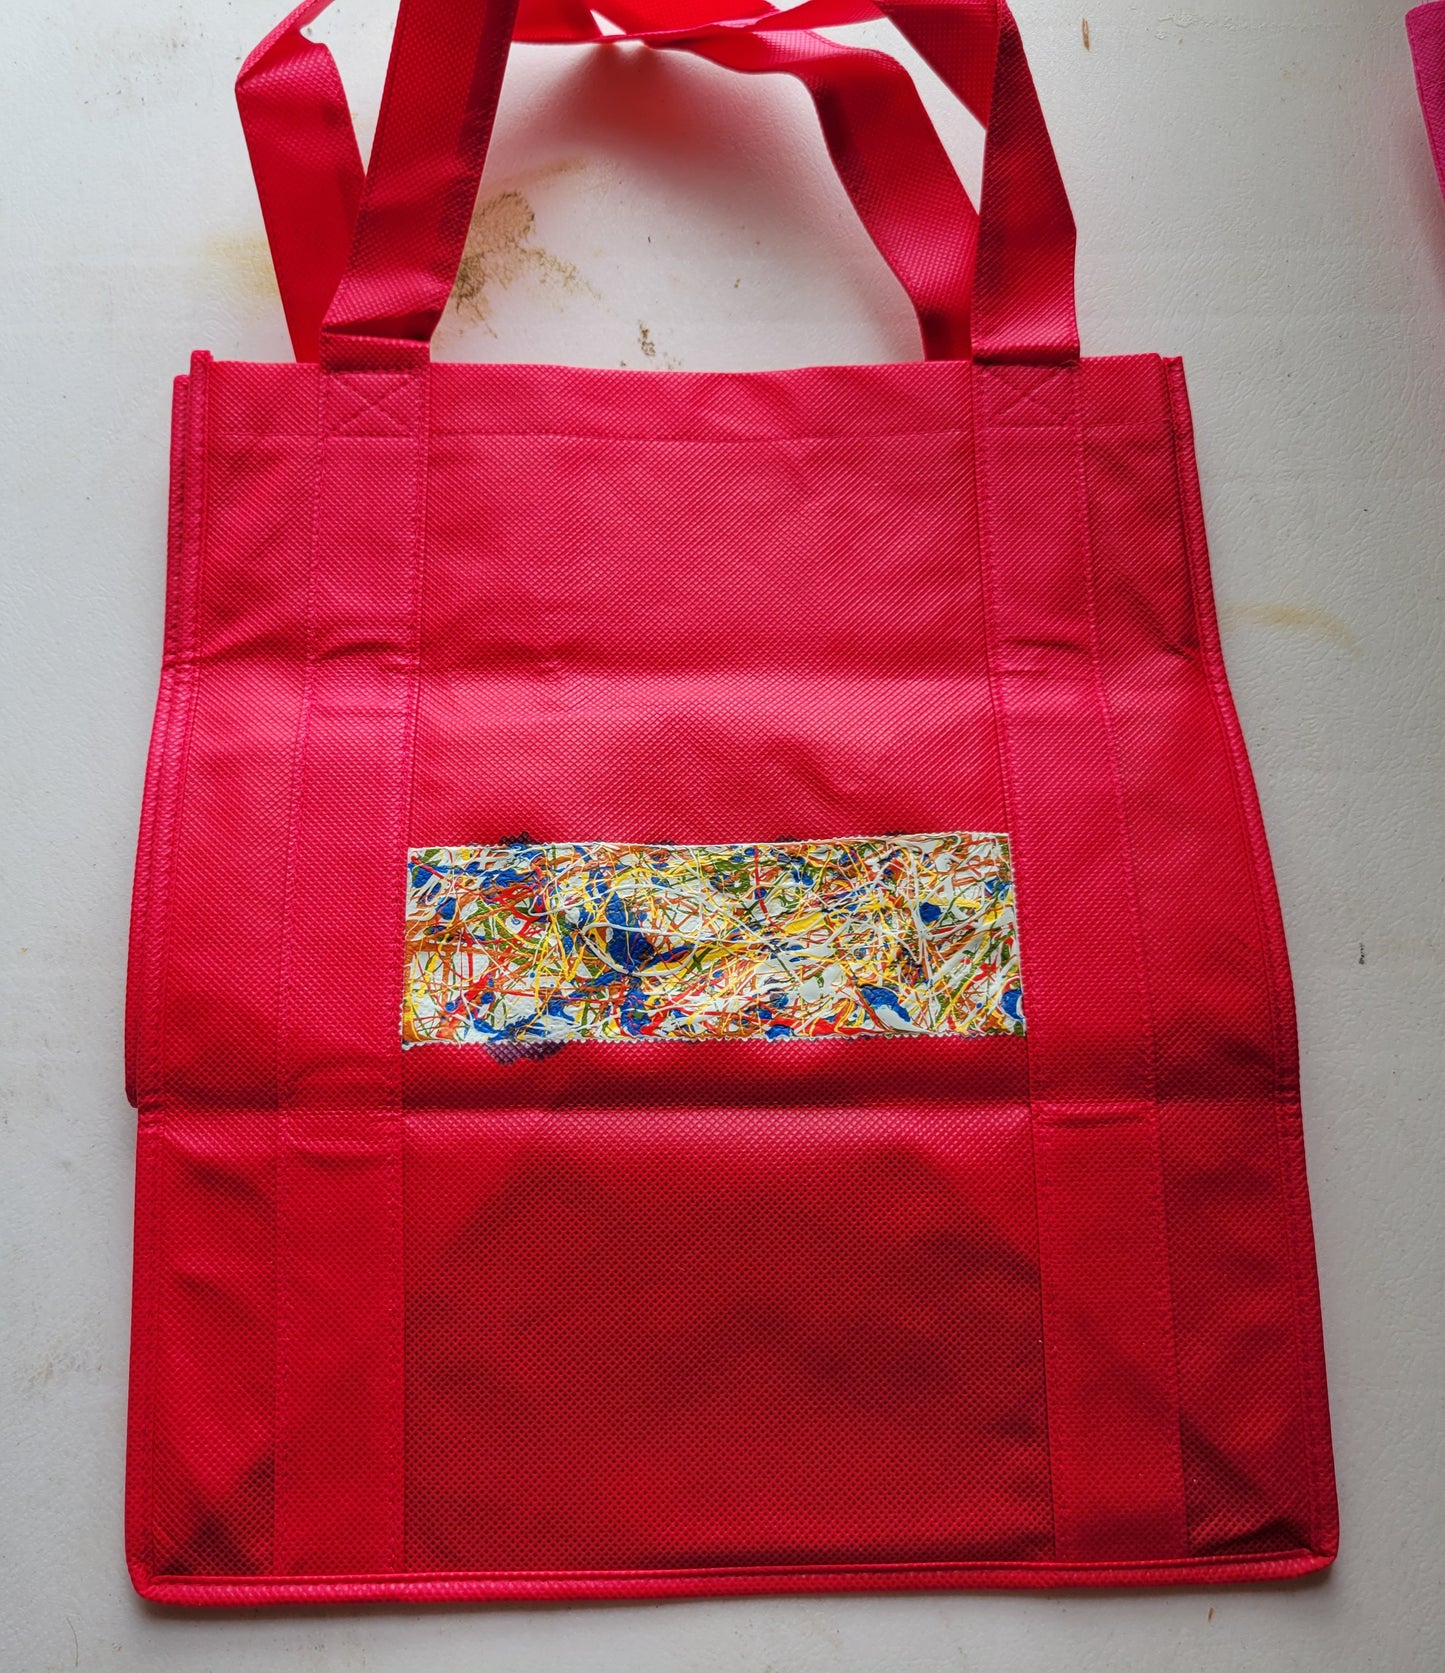 Paint Splatter Bags - "I Made It" In store event only